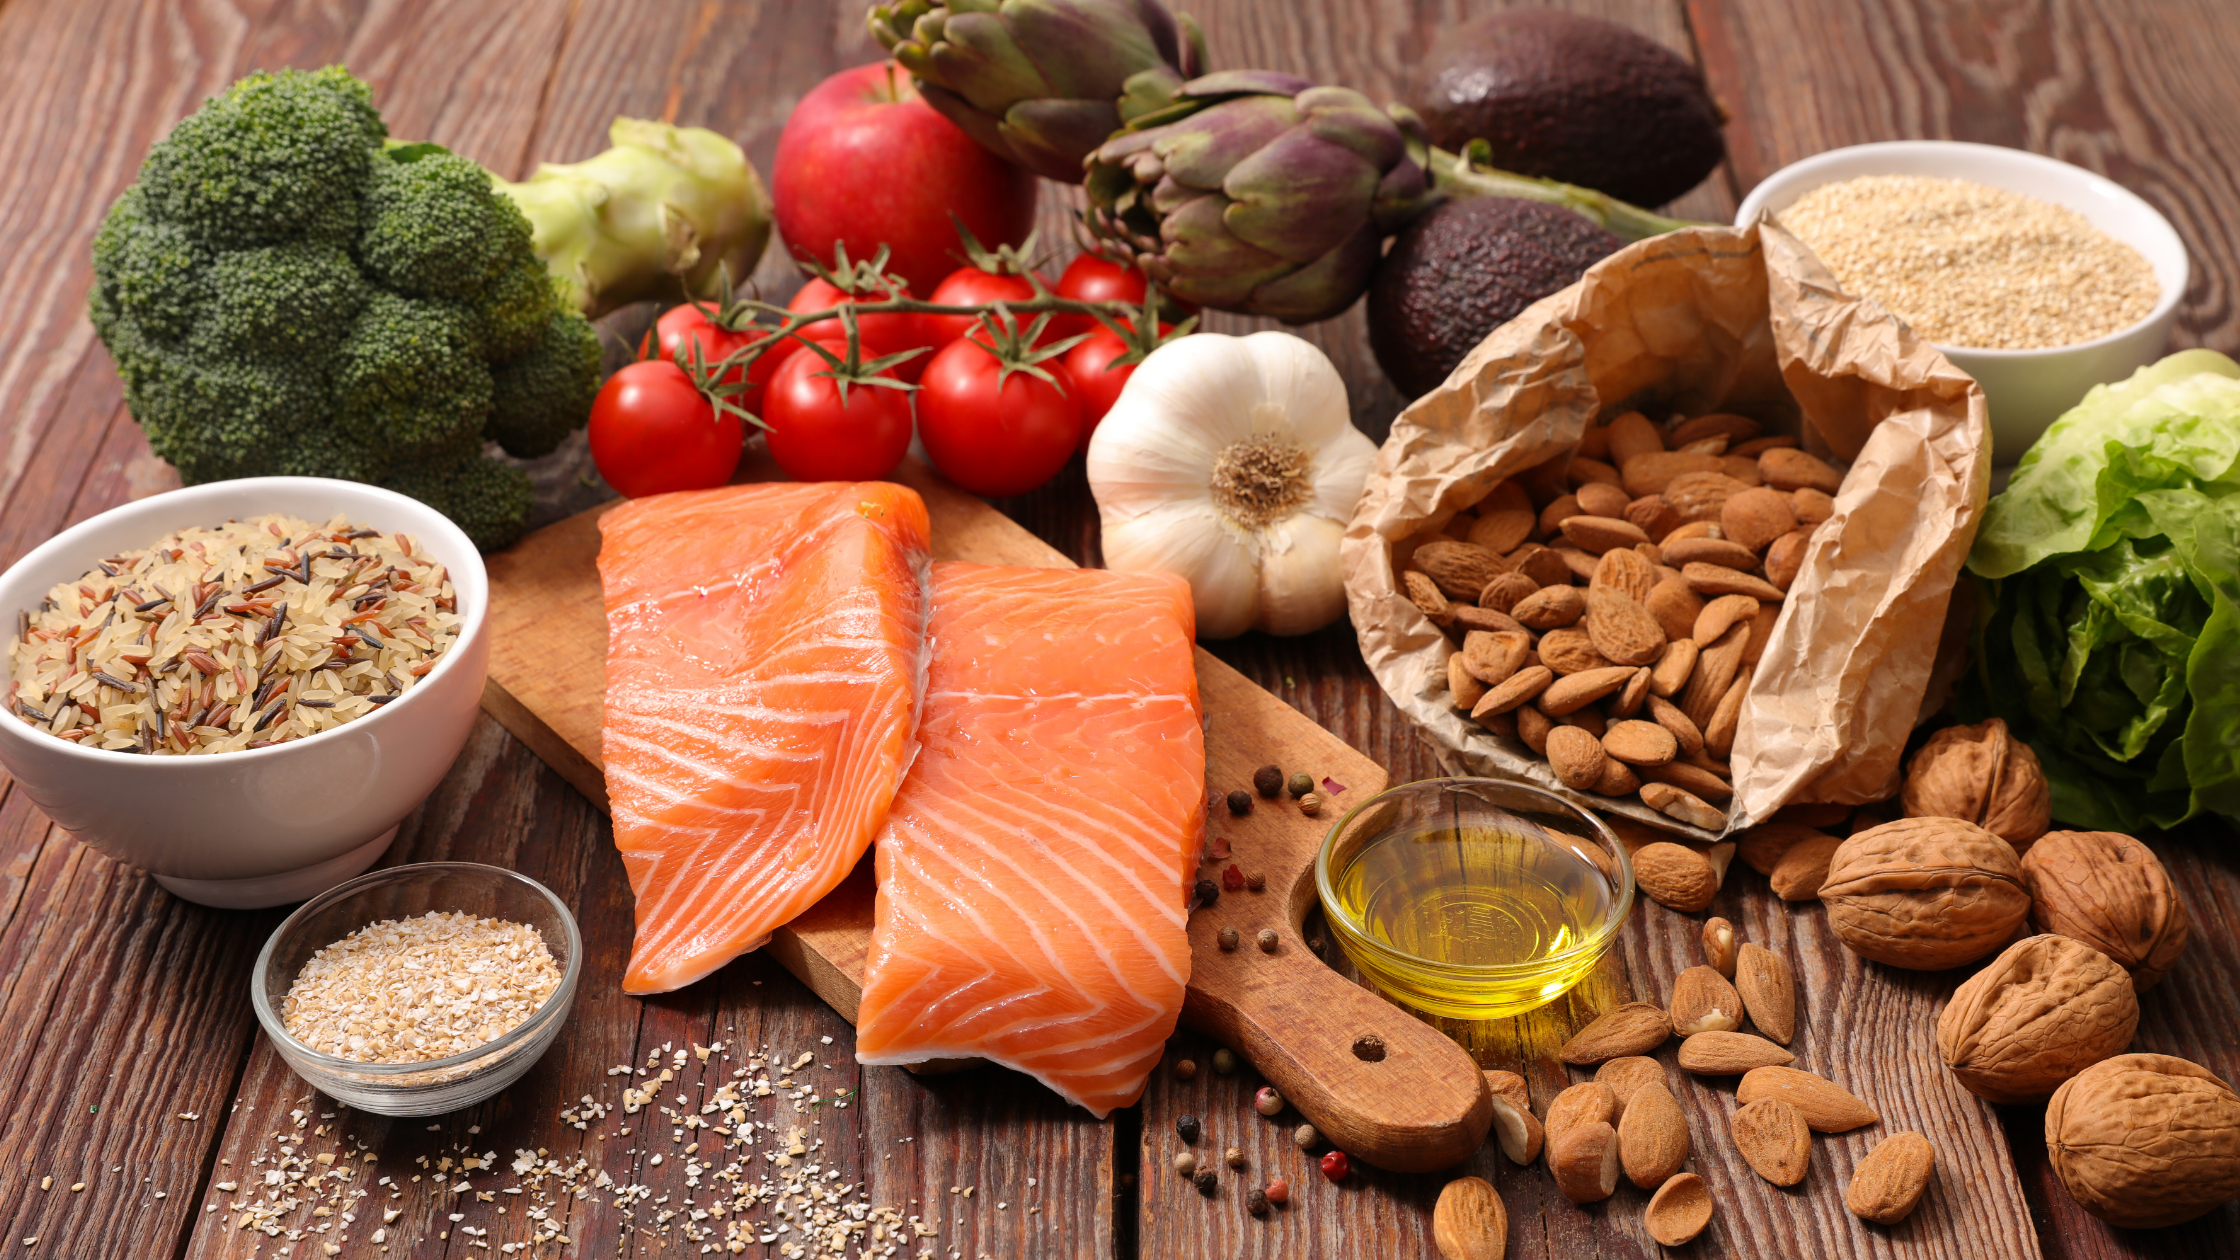 Foods to eat when you have diabetes, salmon, walnuts, broccoli